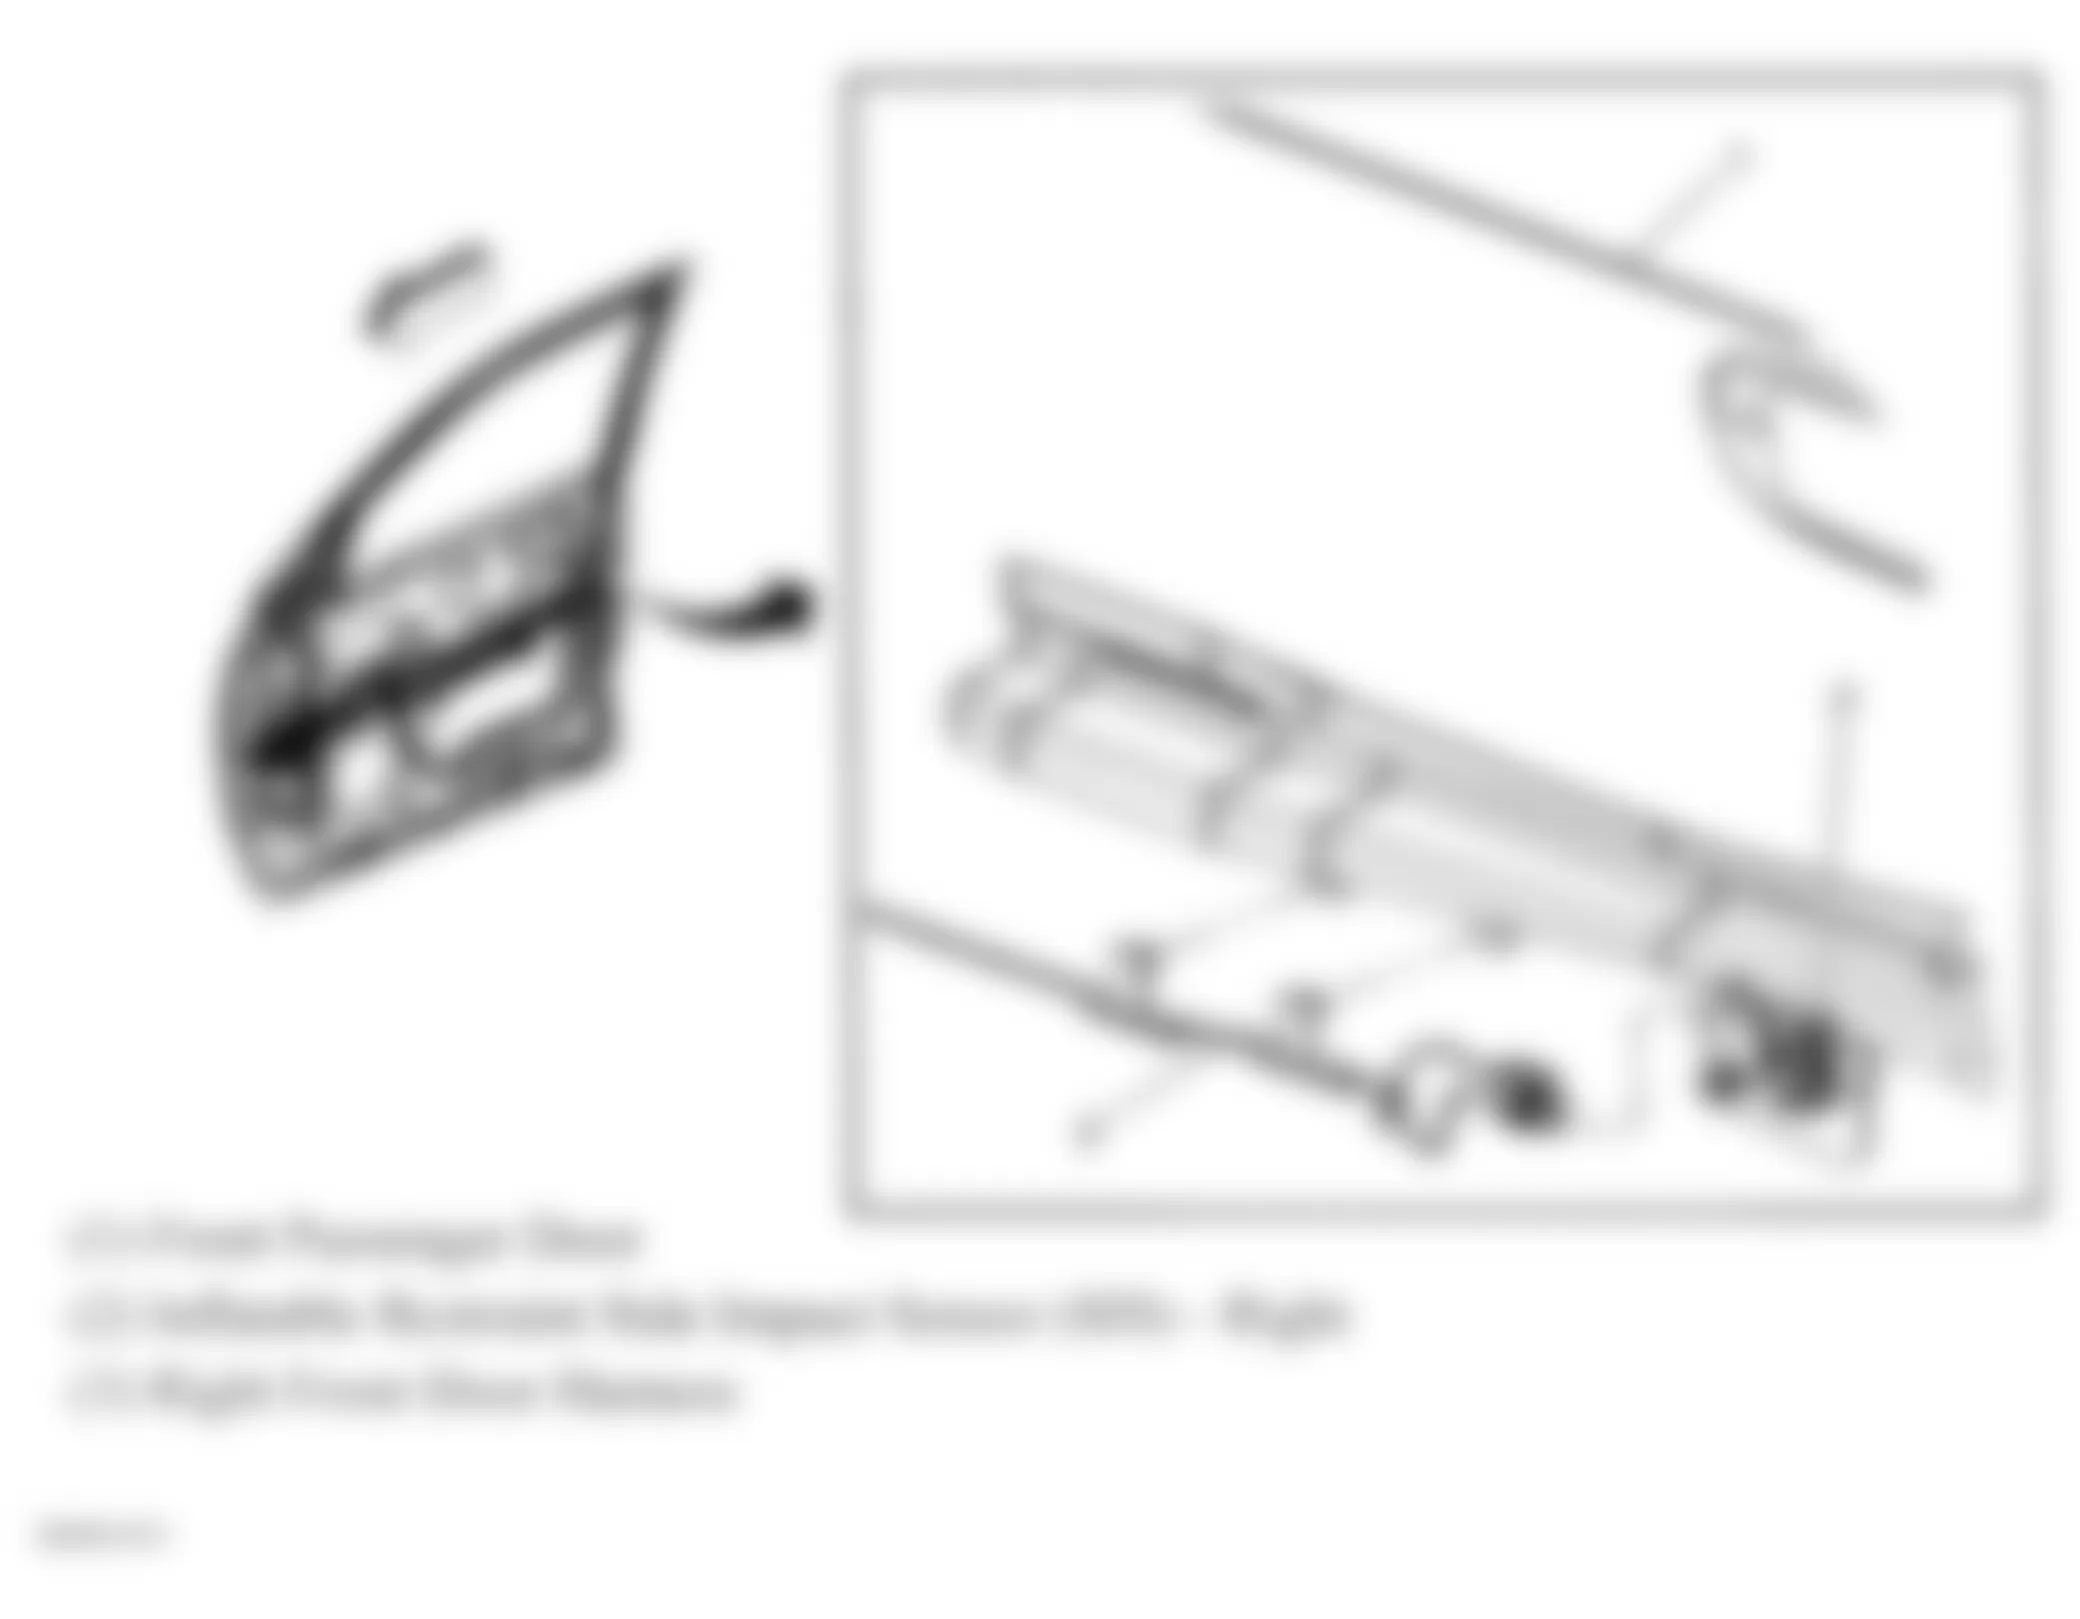 Isuzu Ascender S 2007 - Component Locations -  Right Inflatable Restraint Side Impact Sensor (SIS)